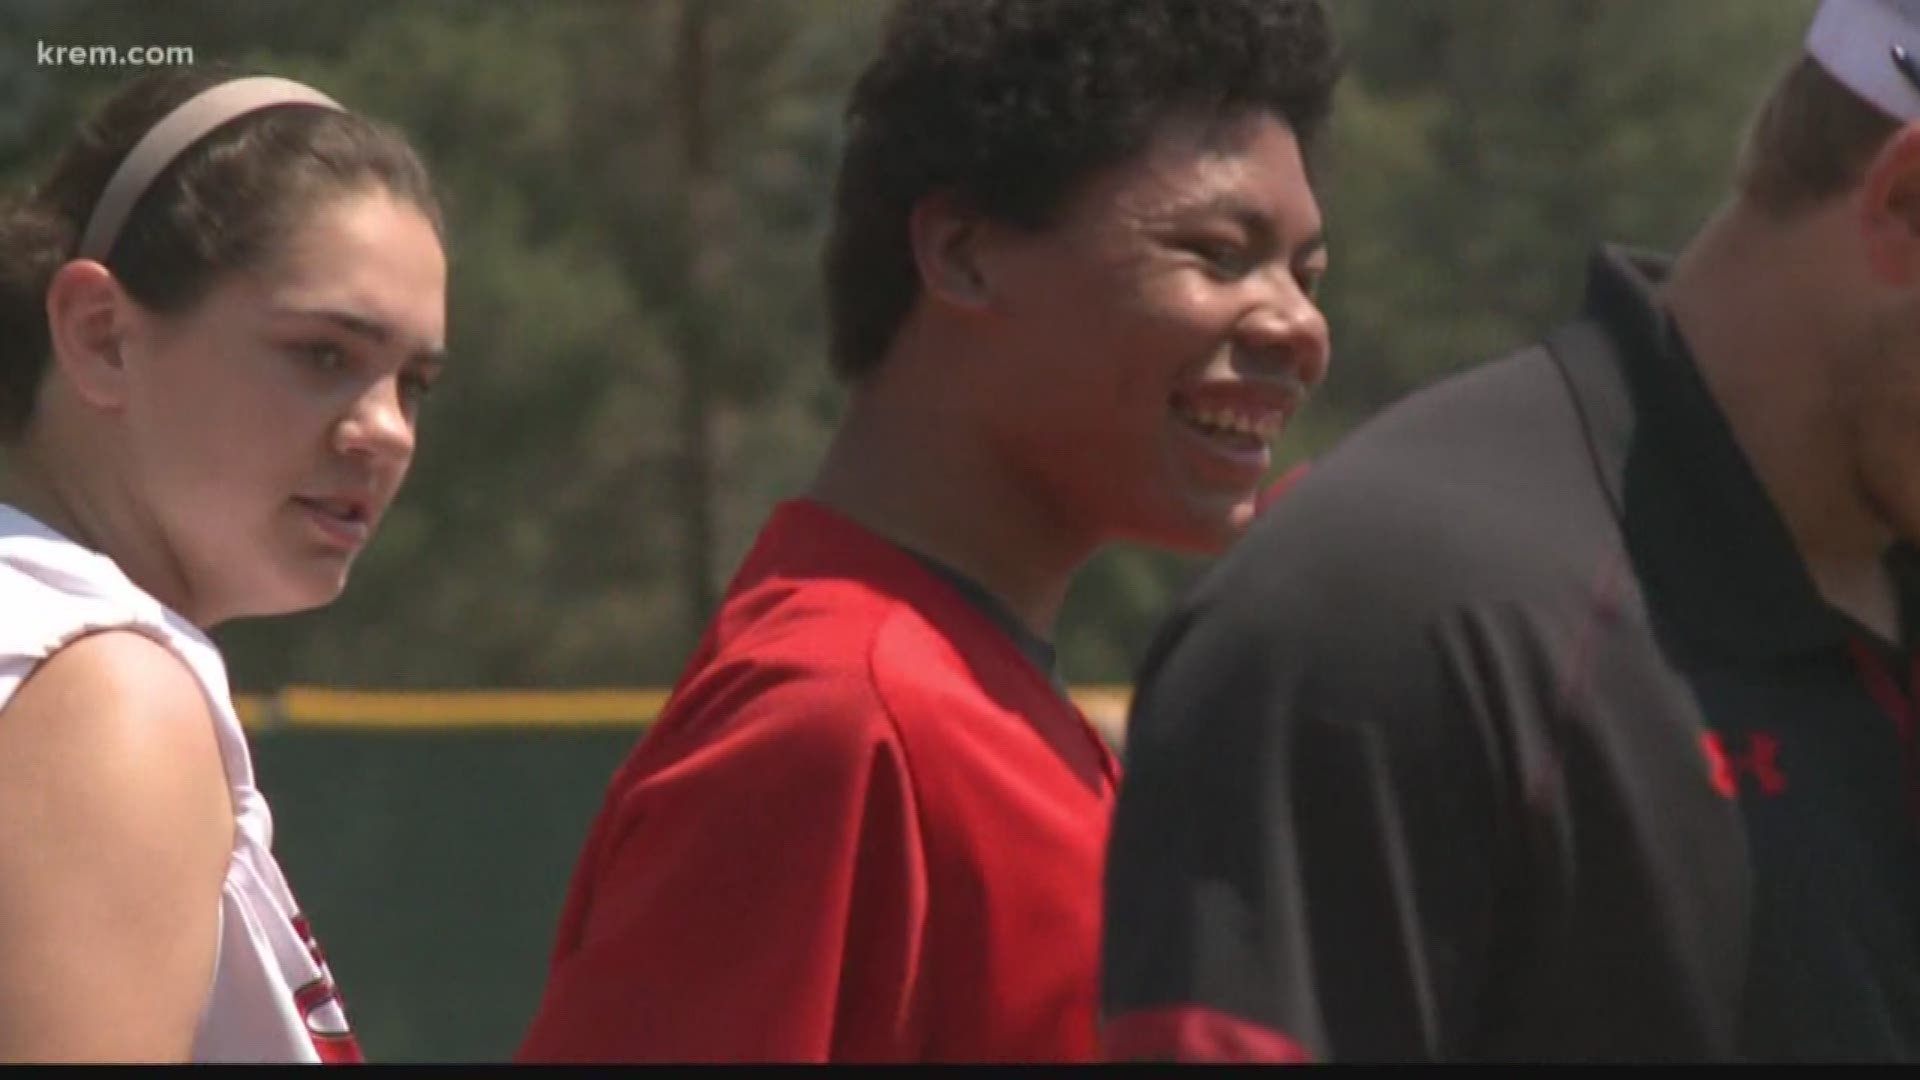 As the school year nears its end, Ferris High School is celebrating with a heartwarming kind of baseball game. The varsity baseball and softball teams partner with kids who have special needs for a game and students pack the stands to watch.